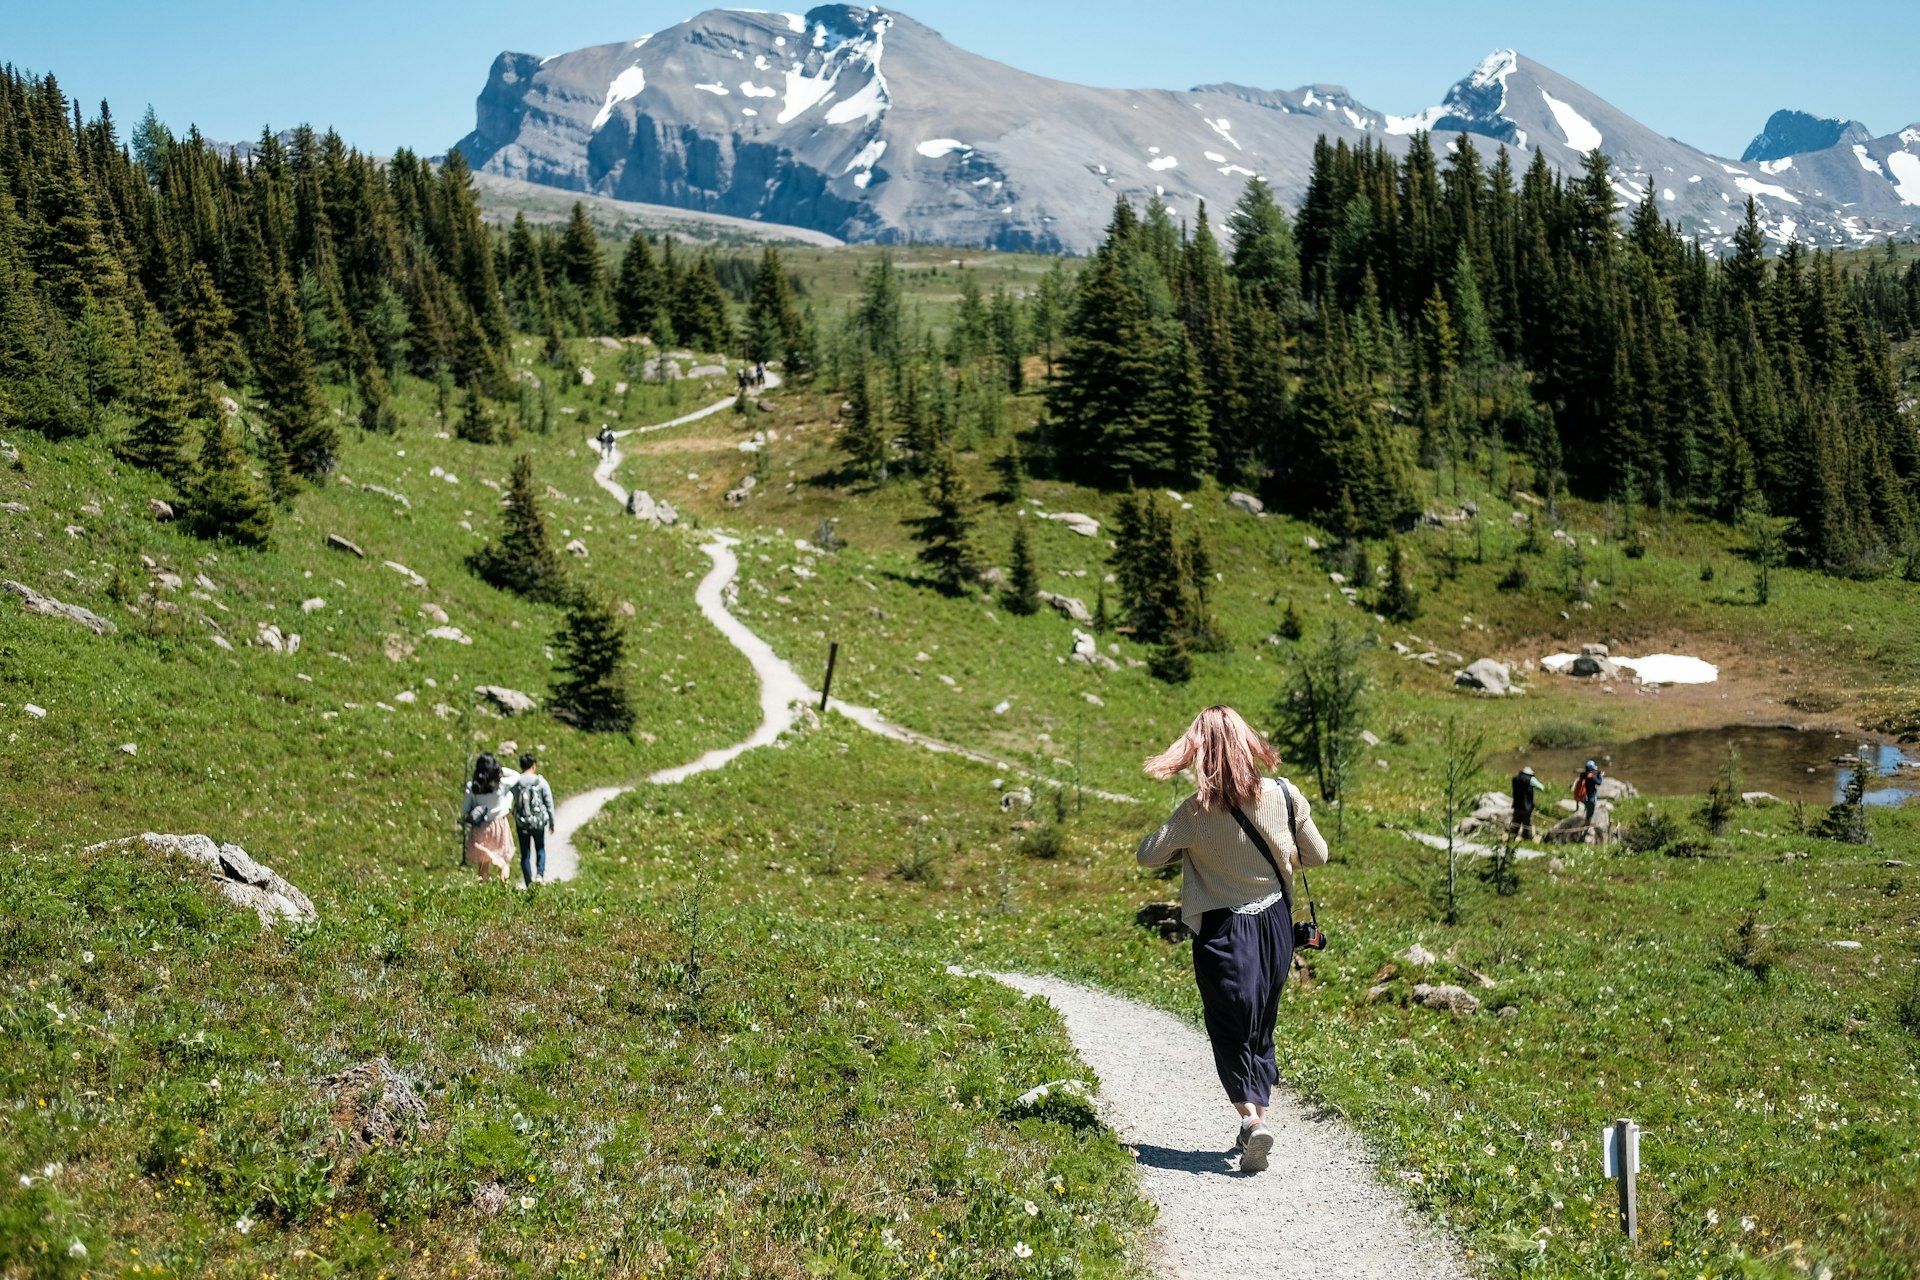 Several people are walking along clearly marked paths through a grassy clearing in a mountainous landscape dotted with evergreen trees